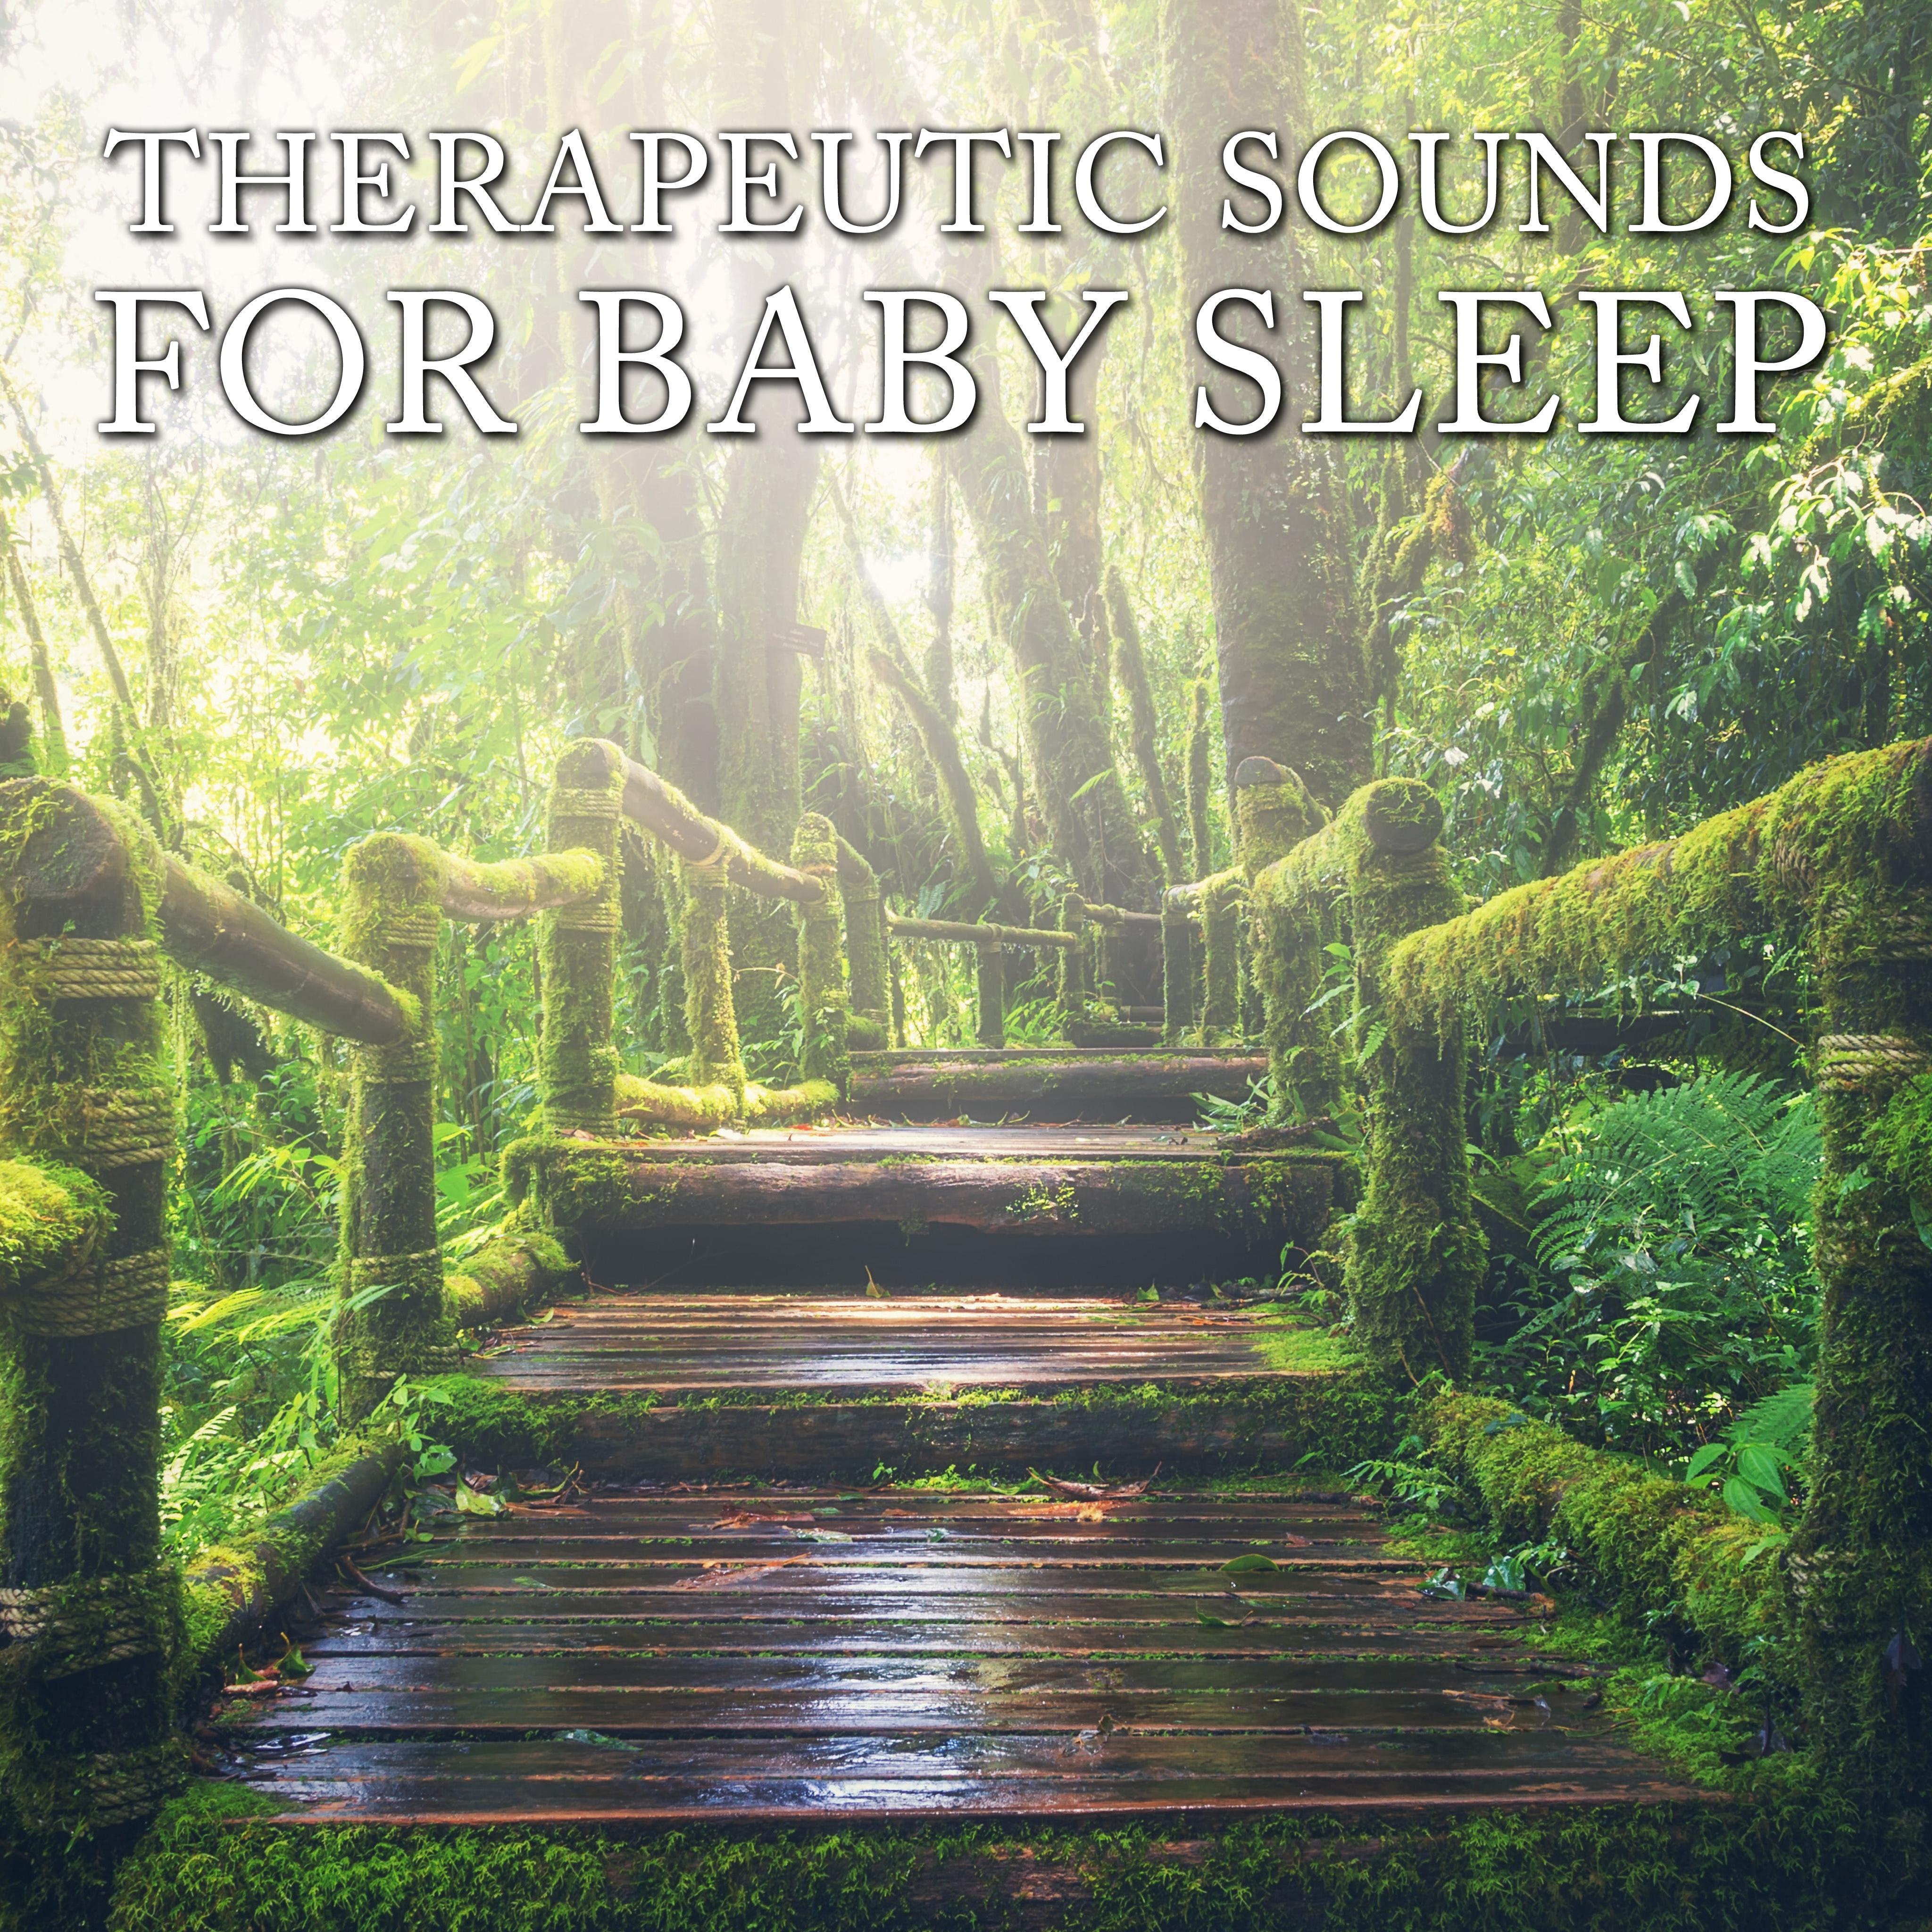 11 Therapeutic Sounds for Baby Sleep